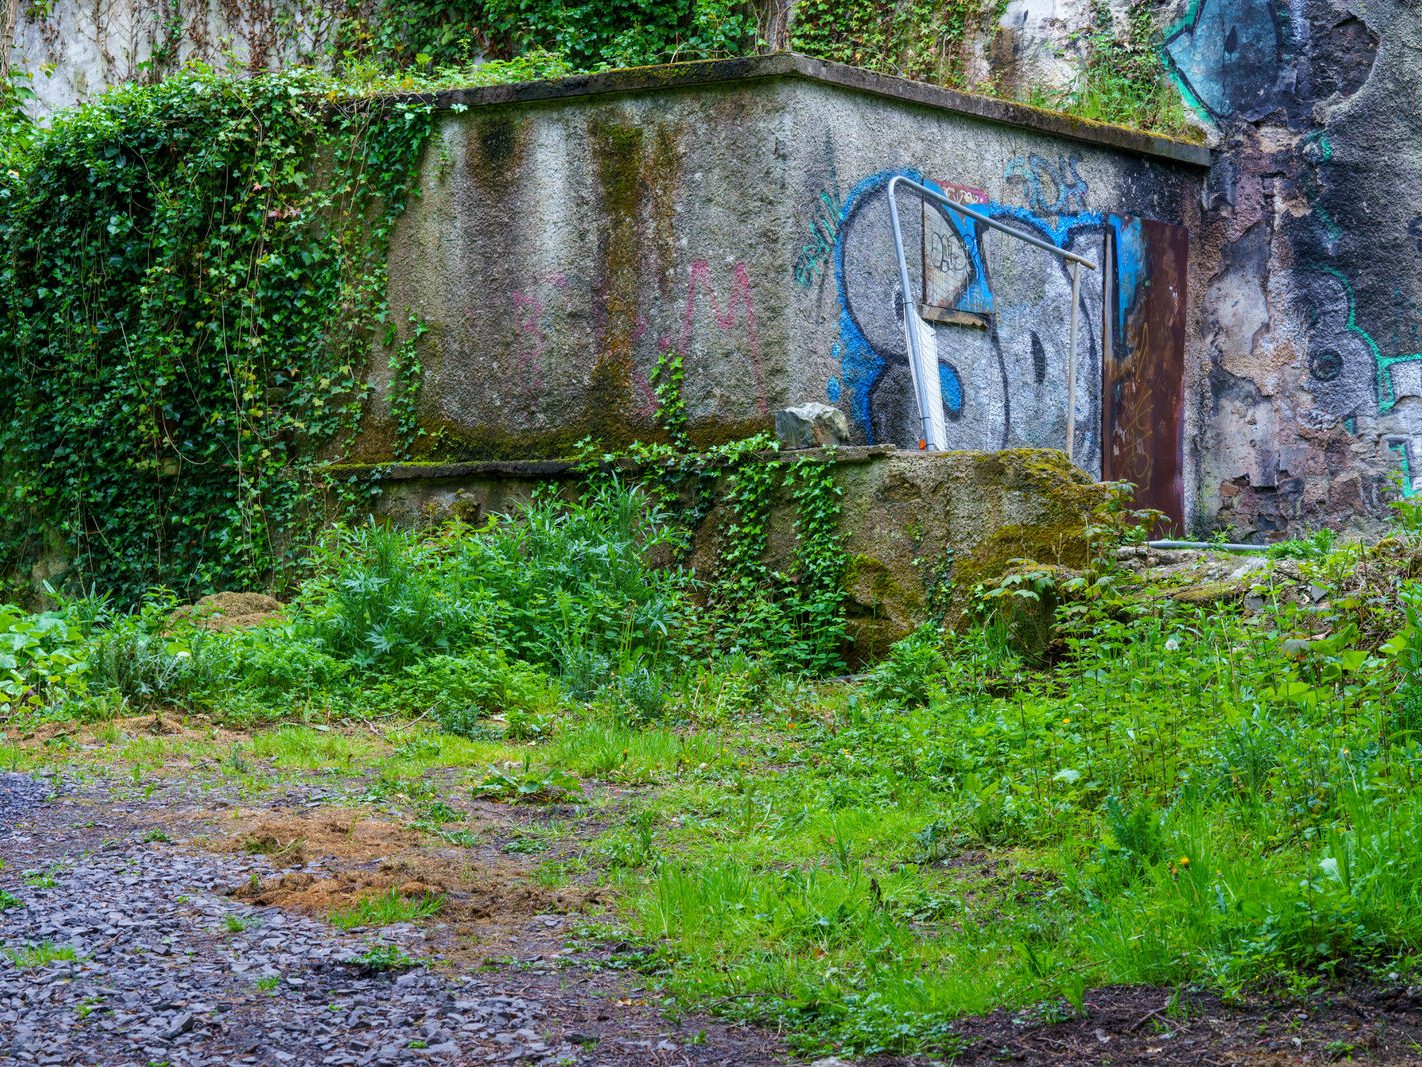 NEAR FARMLEIGH BRIDGE AND THE OLD HARRIS'S HOUSE [TWO DERELICT STRUCTURES AT WATERSTOWN PARK IN PALMERSTOWN]-232563-1